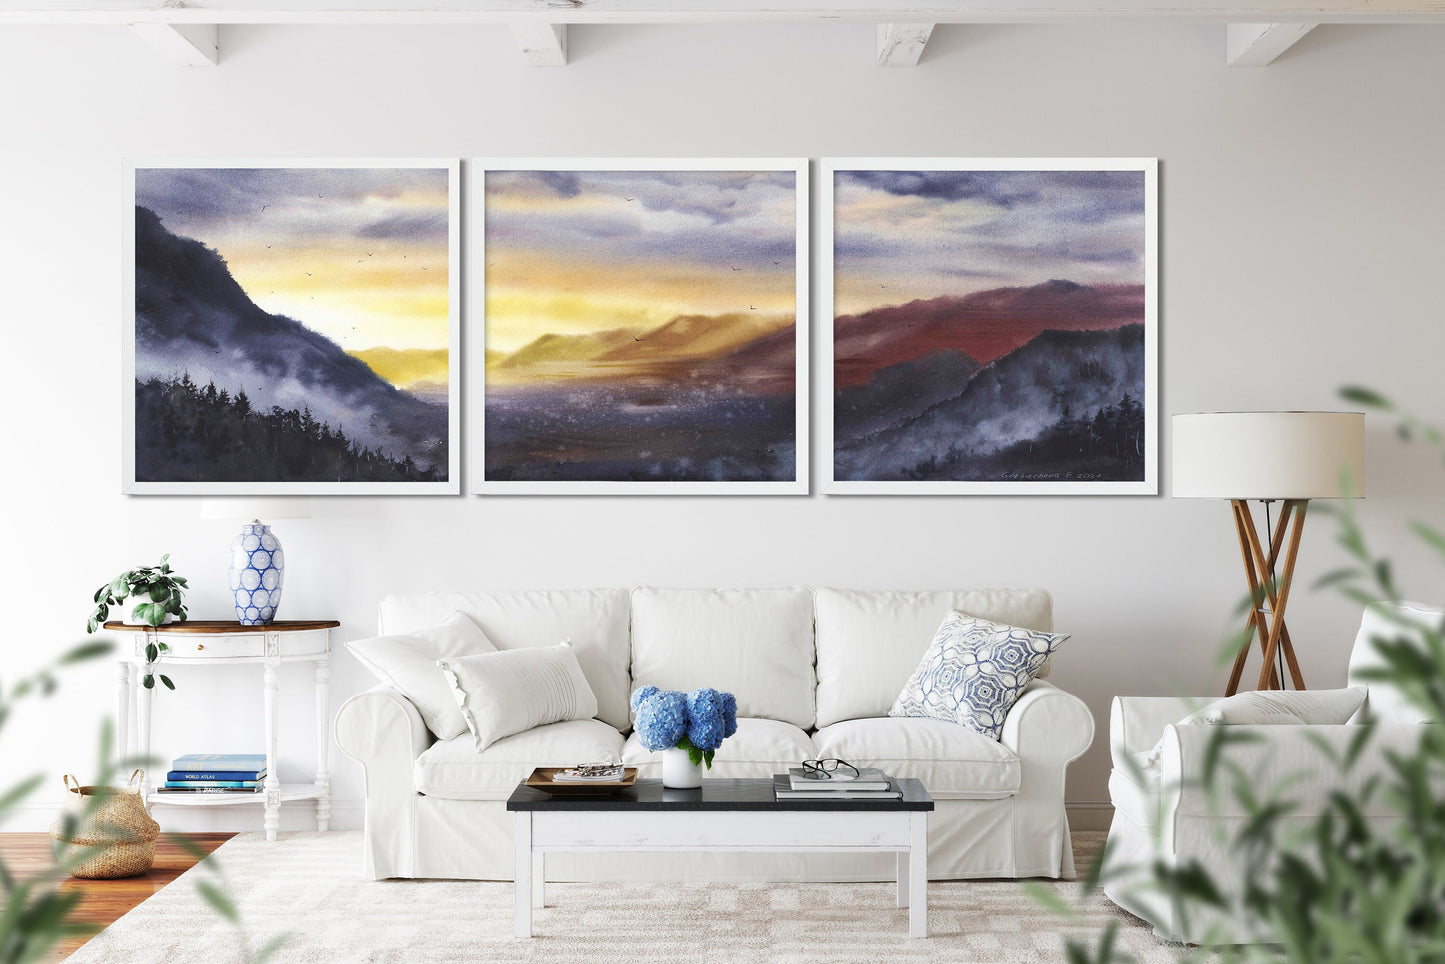 Set Of 3 Square Prints, Landscape Wall Art, Nature Art, Mountain Paintings on Canvas, Rolling Purple Hills, Home Decor